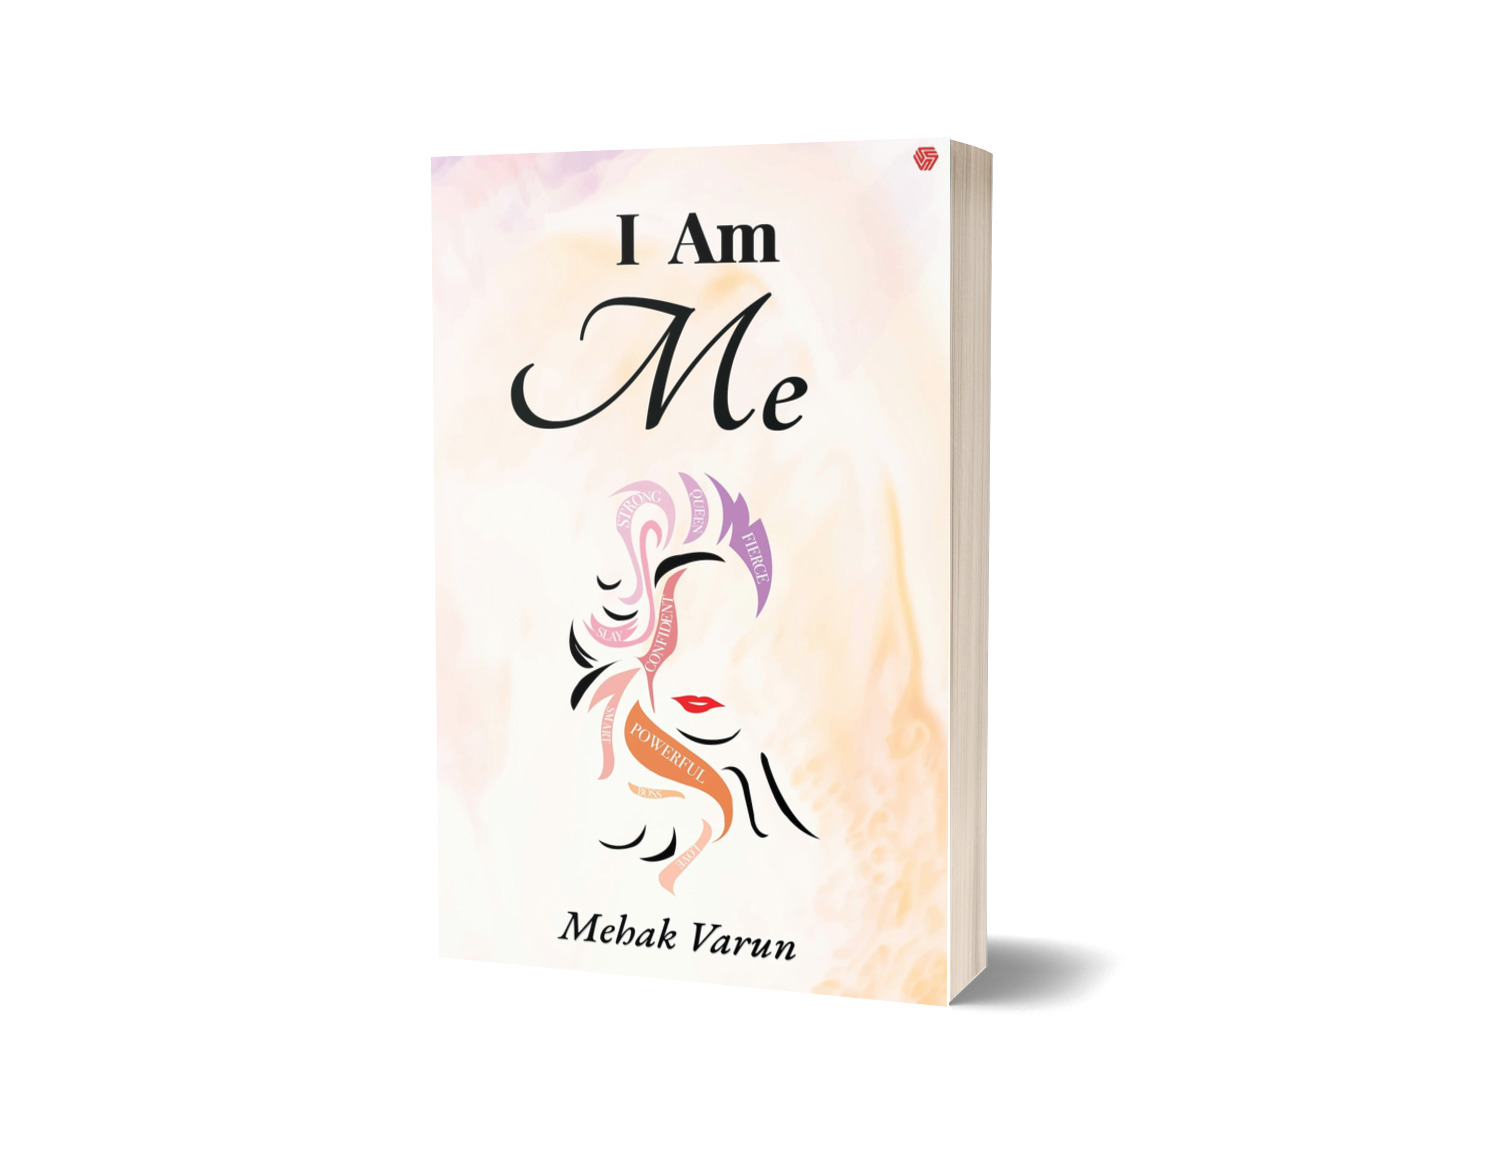 i am me by mehak varun